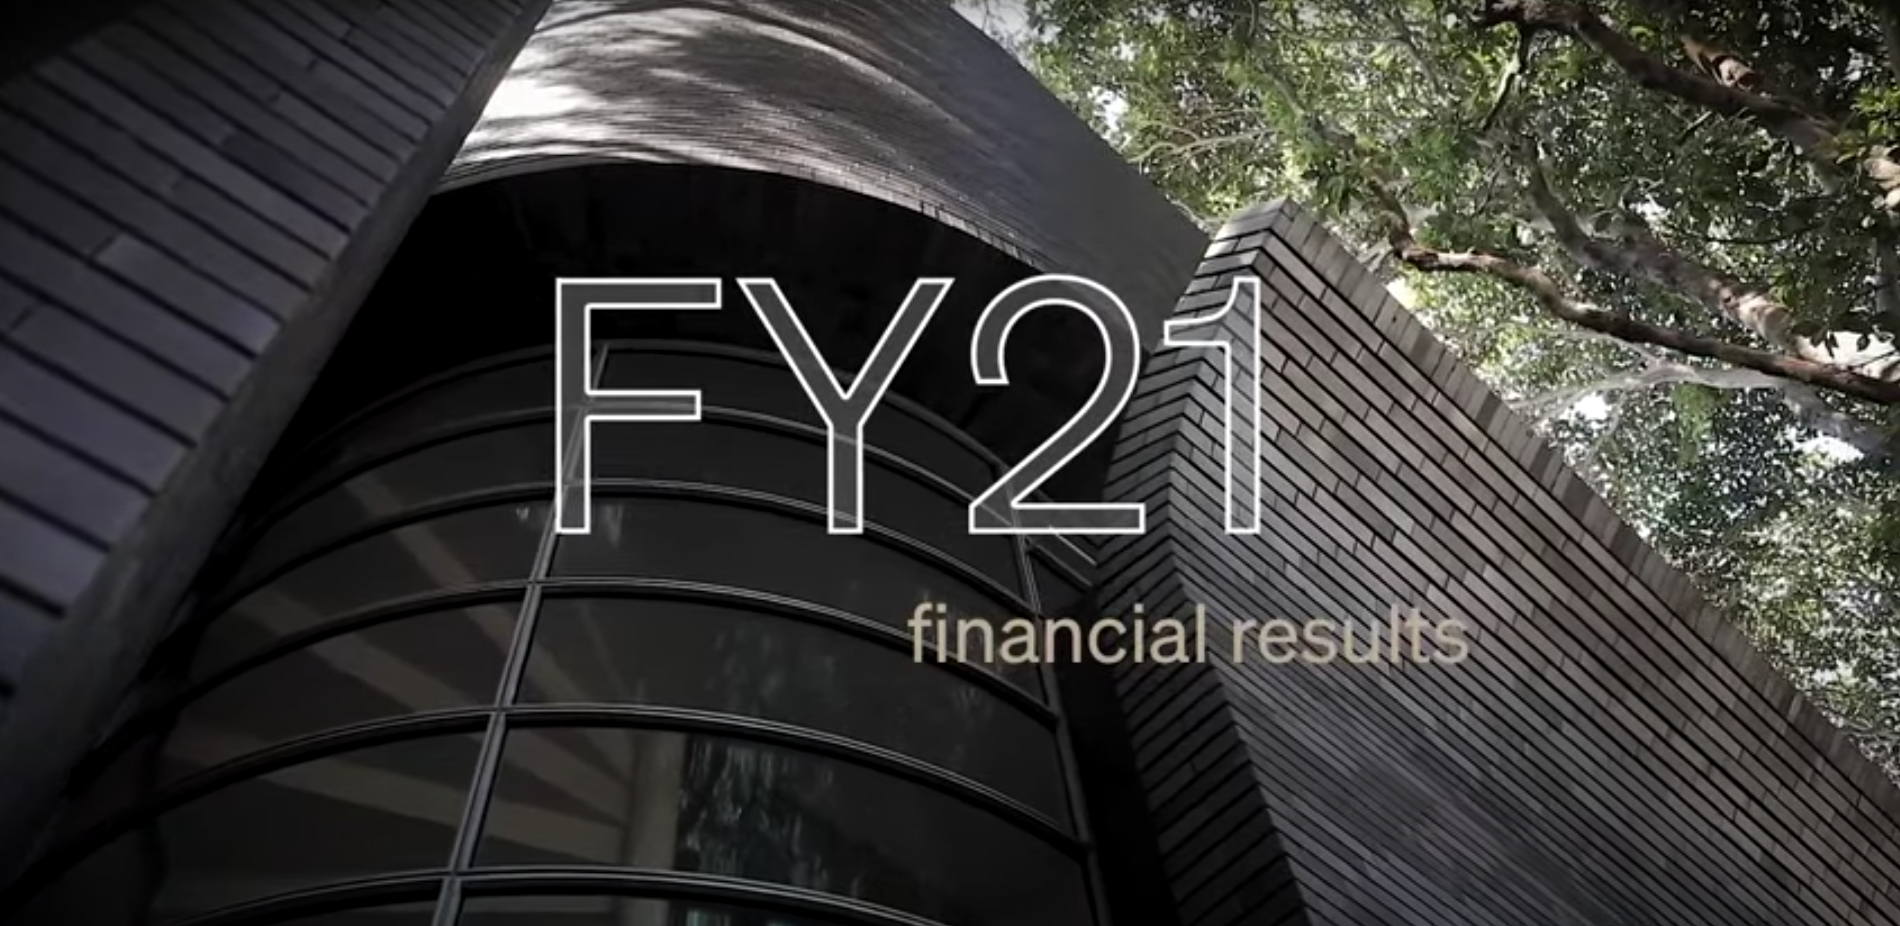 FY 21 Financial Results